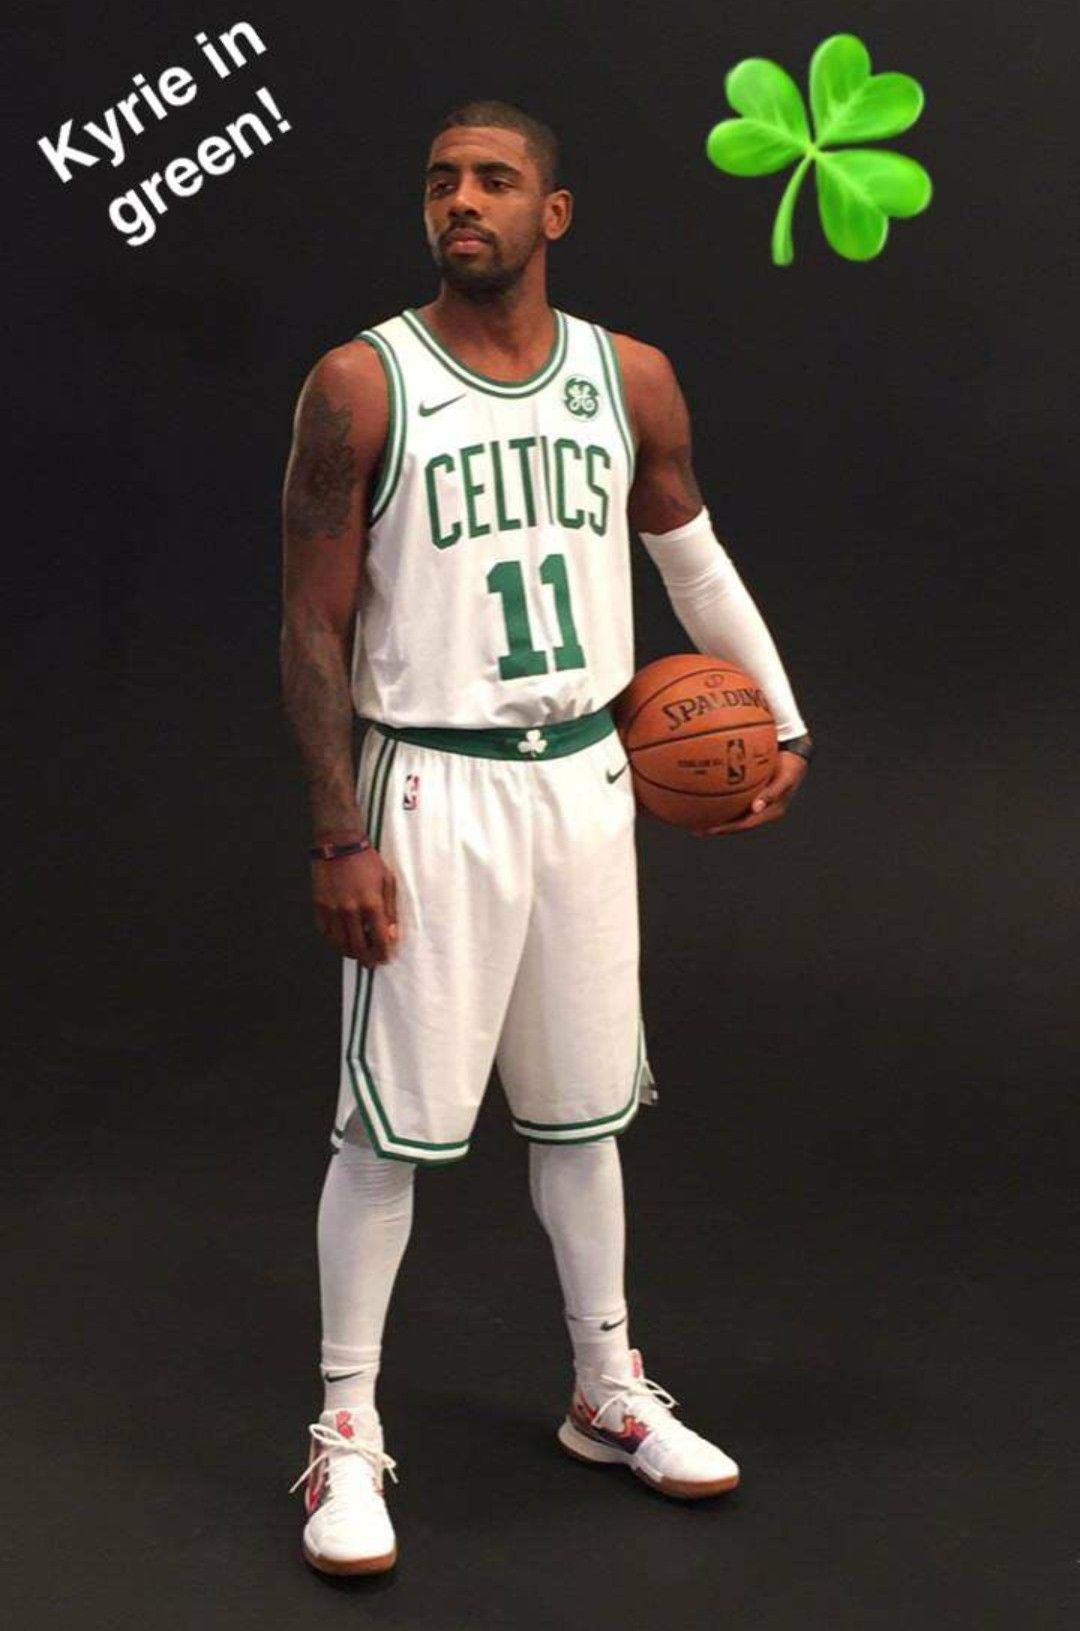 Kyrie Iphone Wallpaper Kyrie Irving Wallpaper For Iphone 25333 Hd Wallpaper Backgrounds Download